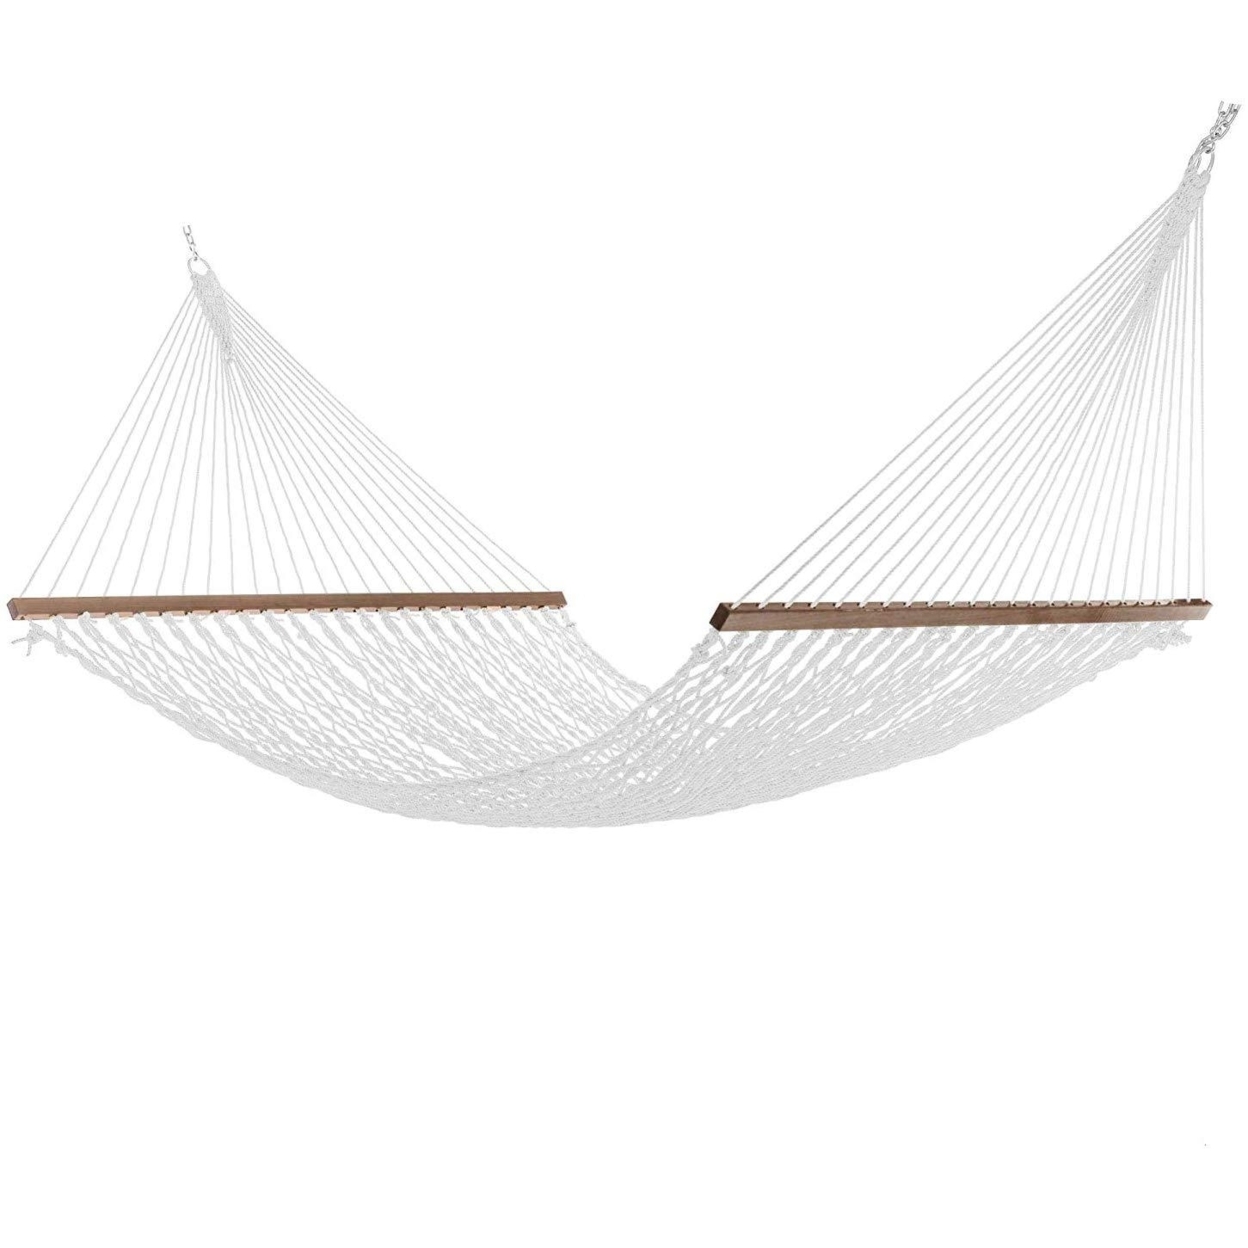 12FT Rope Hammock, Double Size Solid Wood Spreader Bar, 2 Person 450 Pound Capacity - white